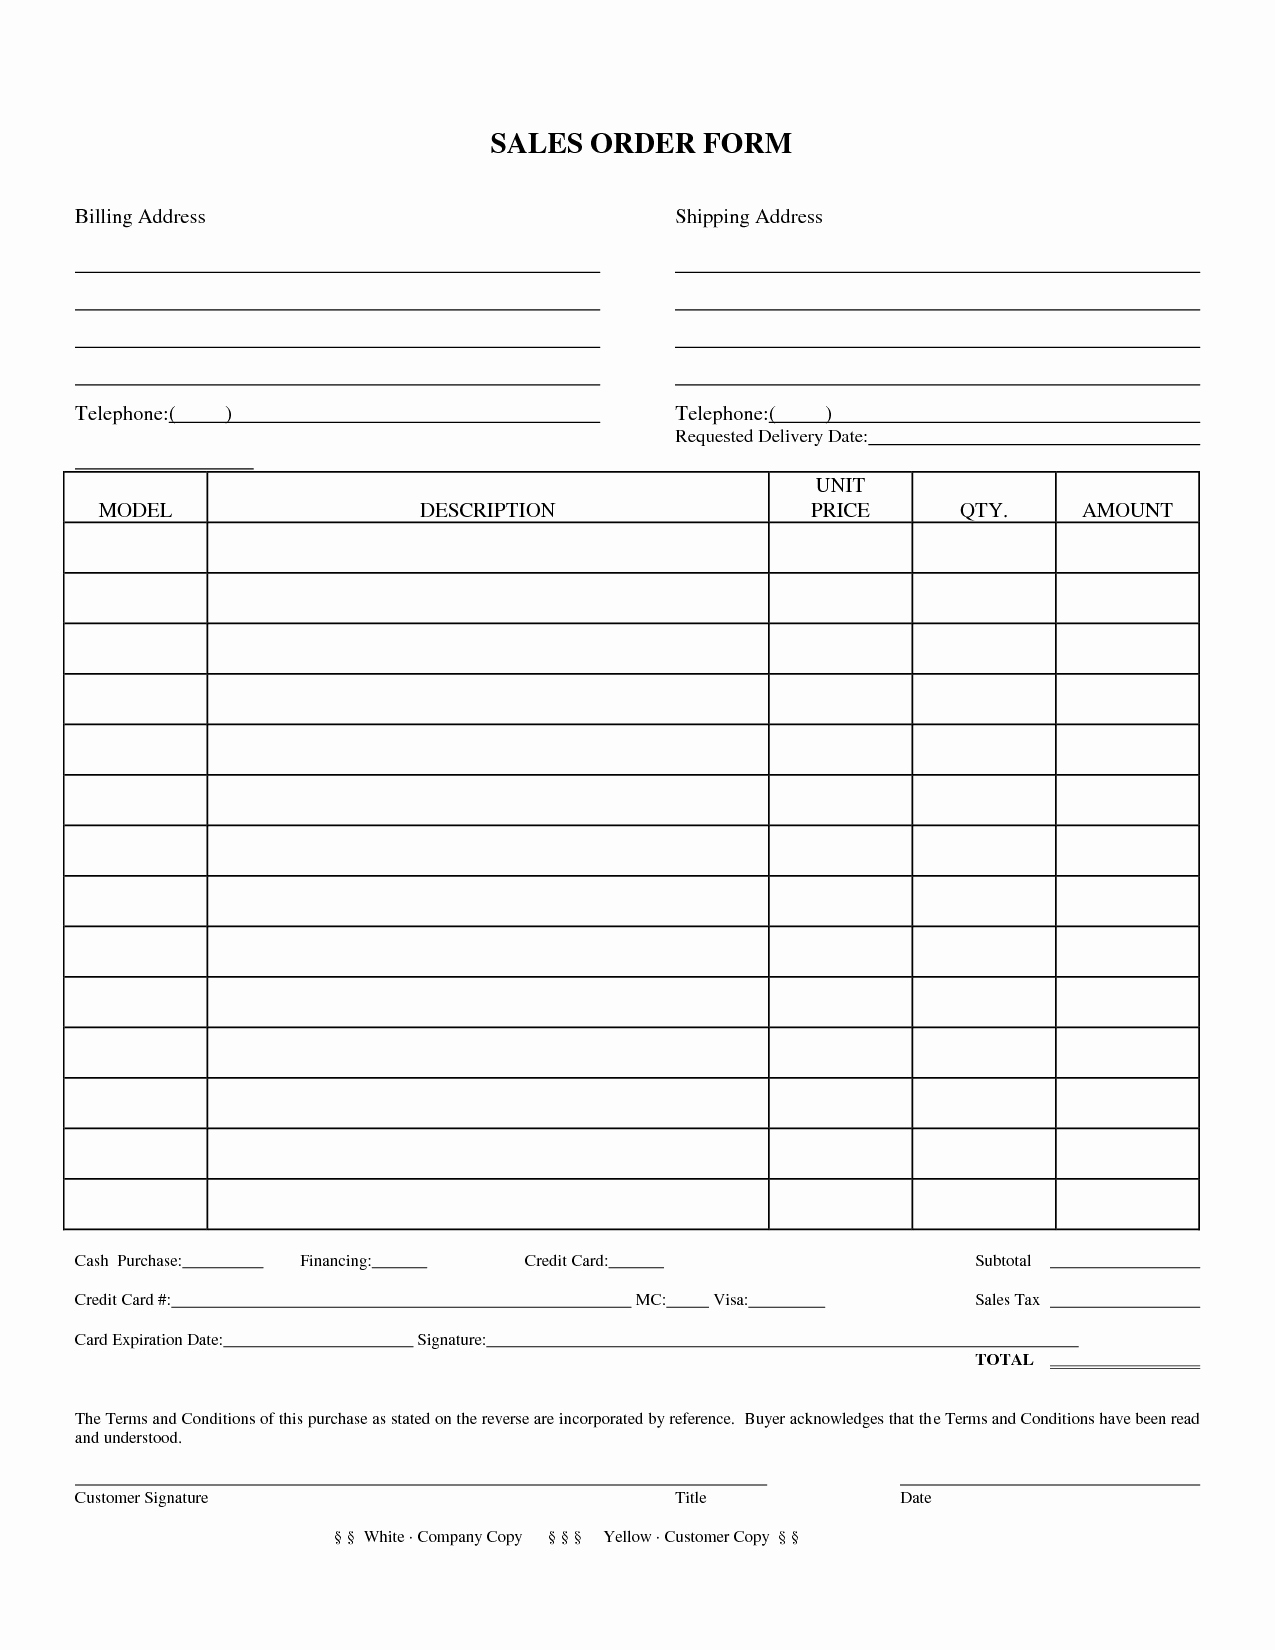 Printable order form Template Awesome Sales forms Sales order form Doc Doc